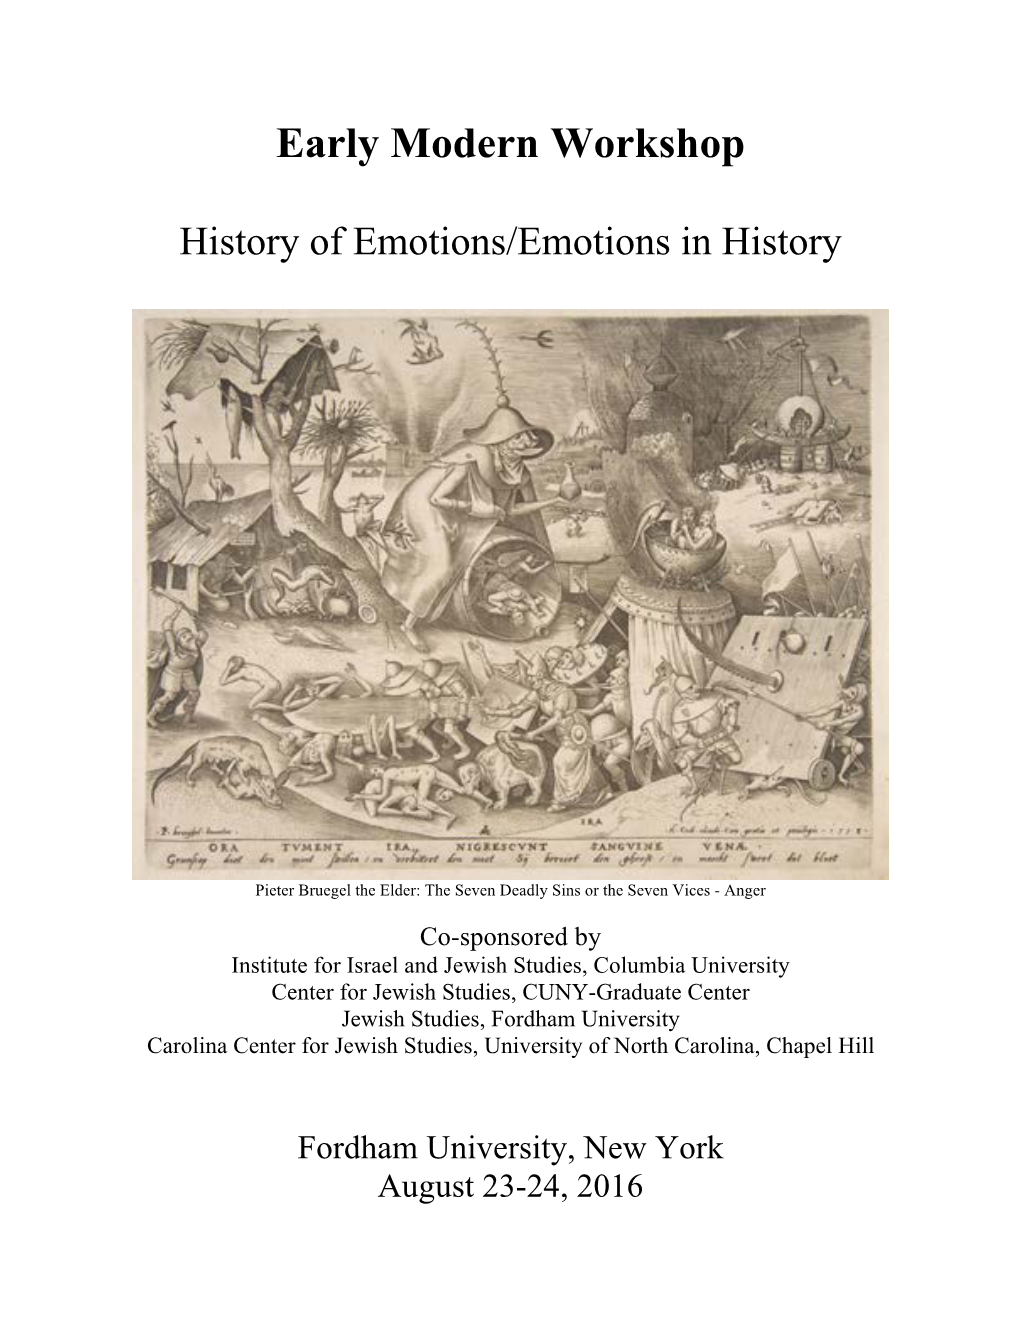 EMW 2016: History of Emotions/Emotions in History